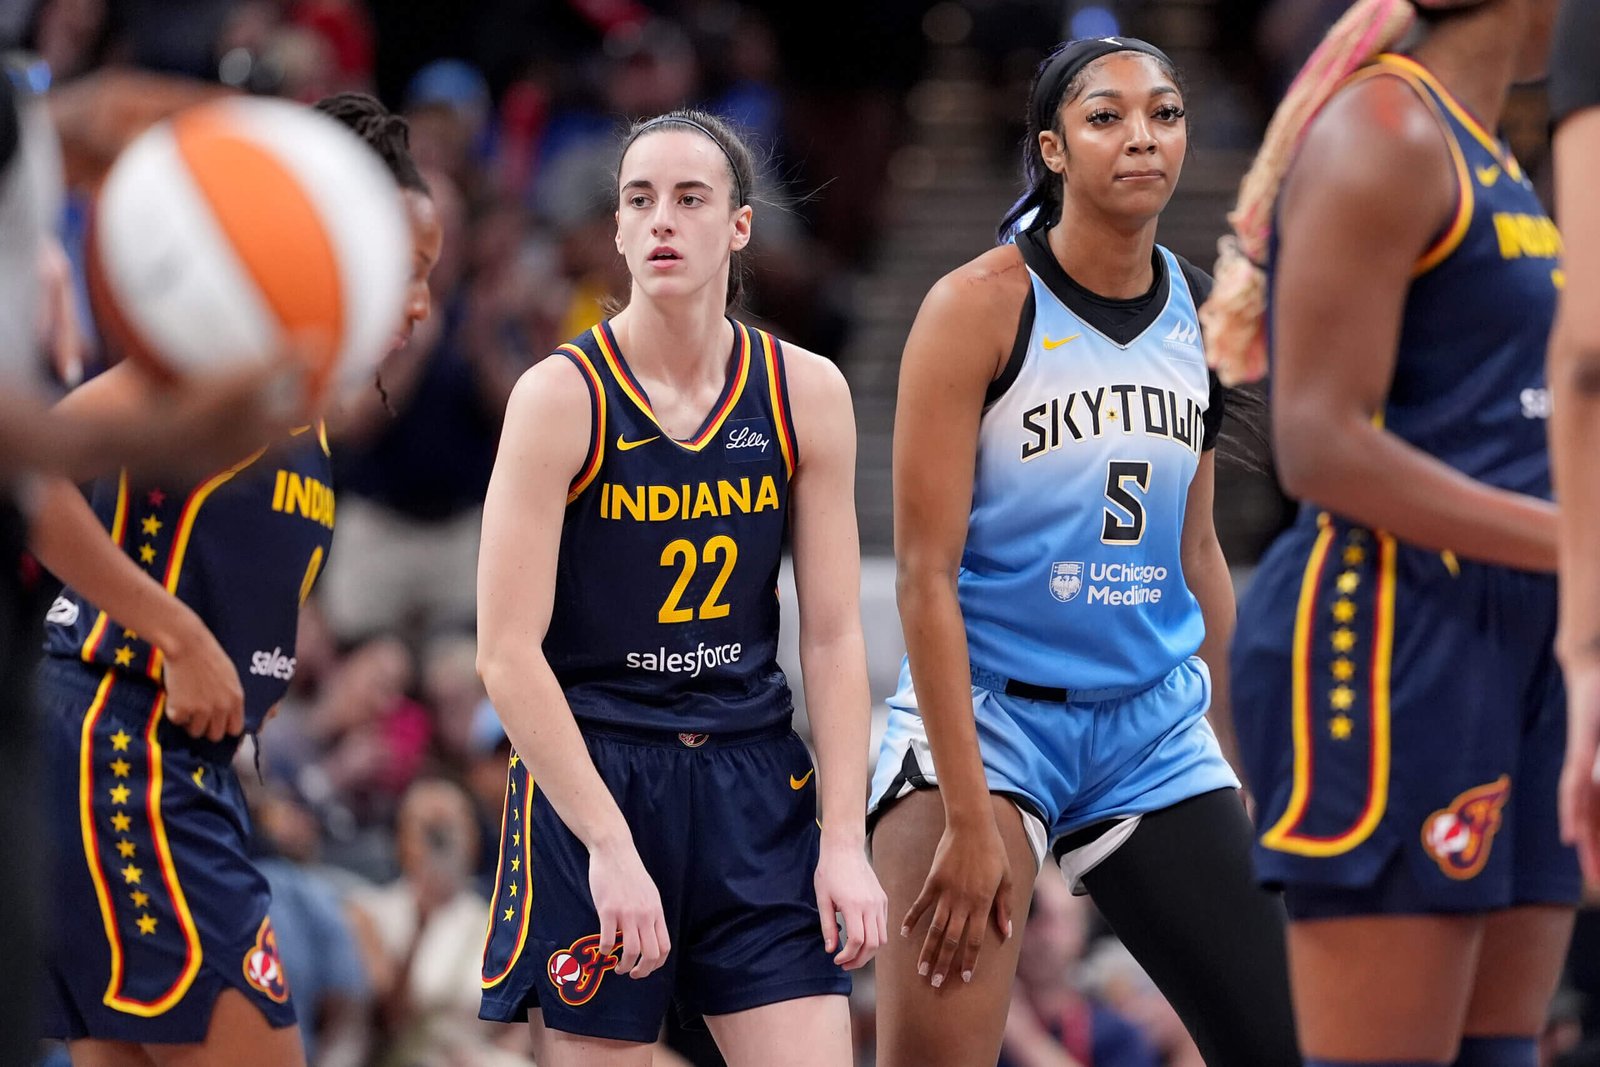 Caitlin Clark, Angel Reese to make WNBA All-Star Sport debuts: Full rosters